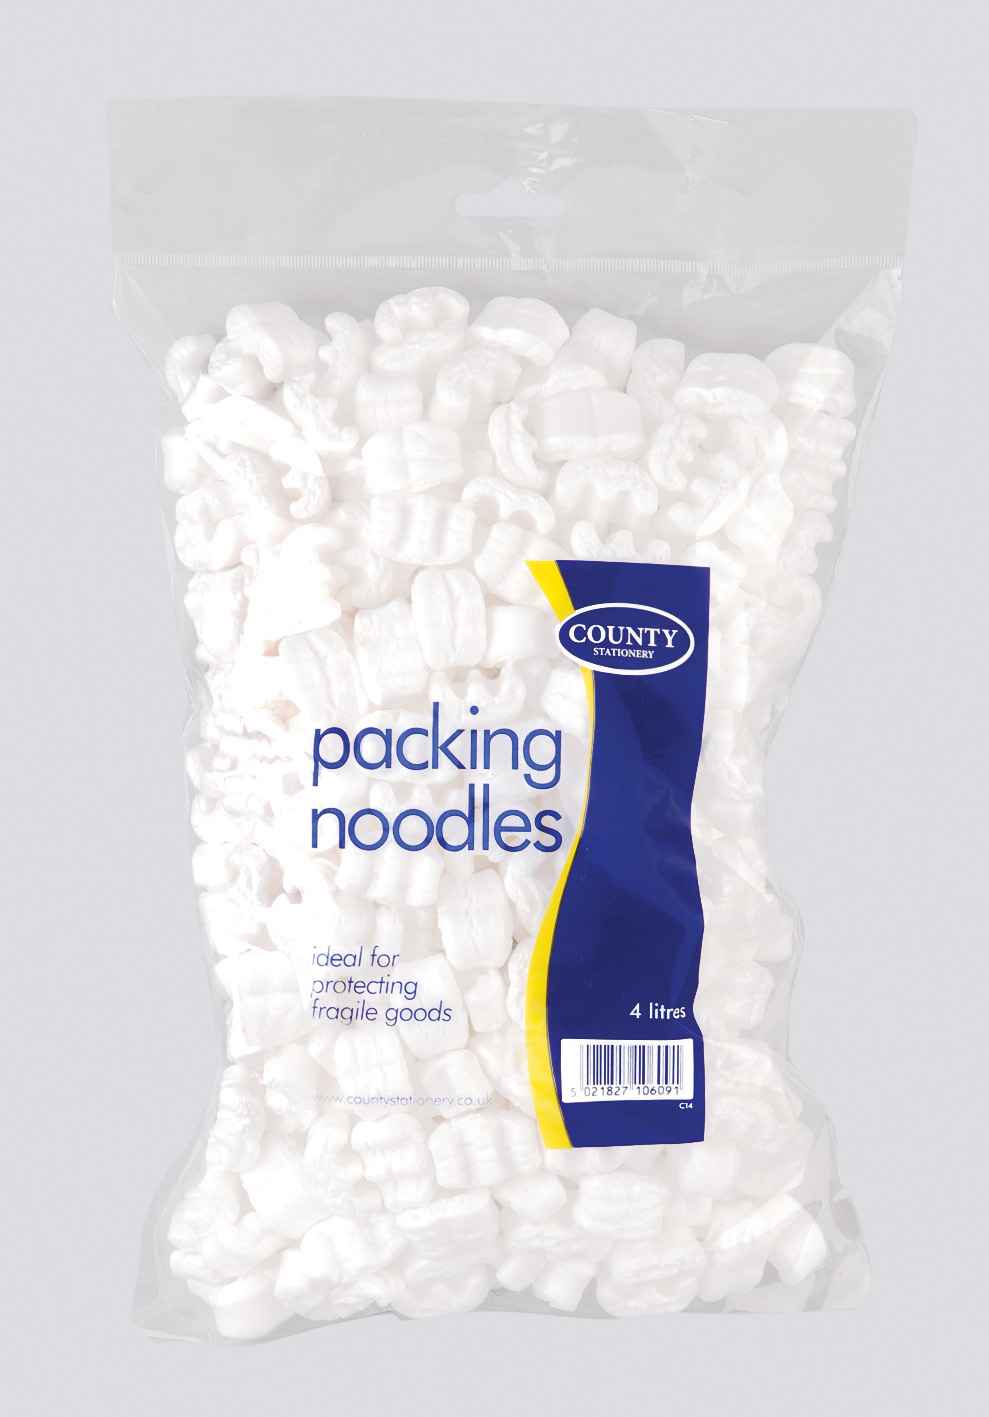 County Packing Noodles - 4 Litres